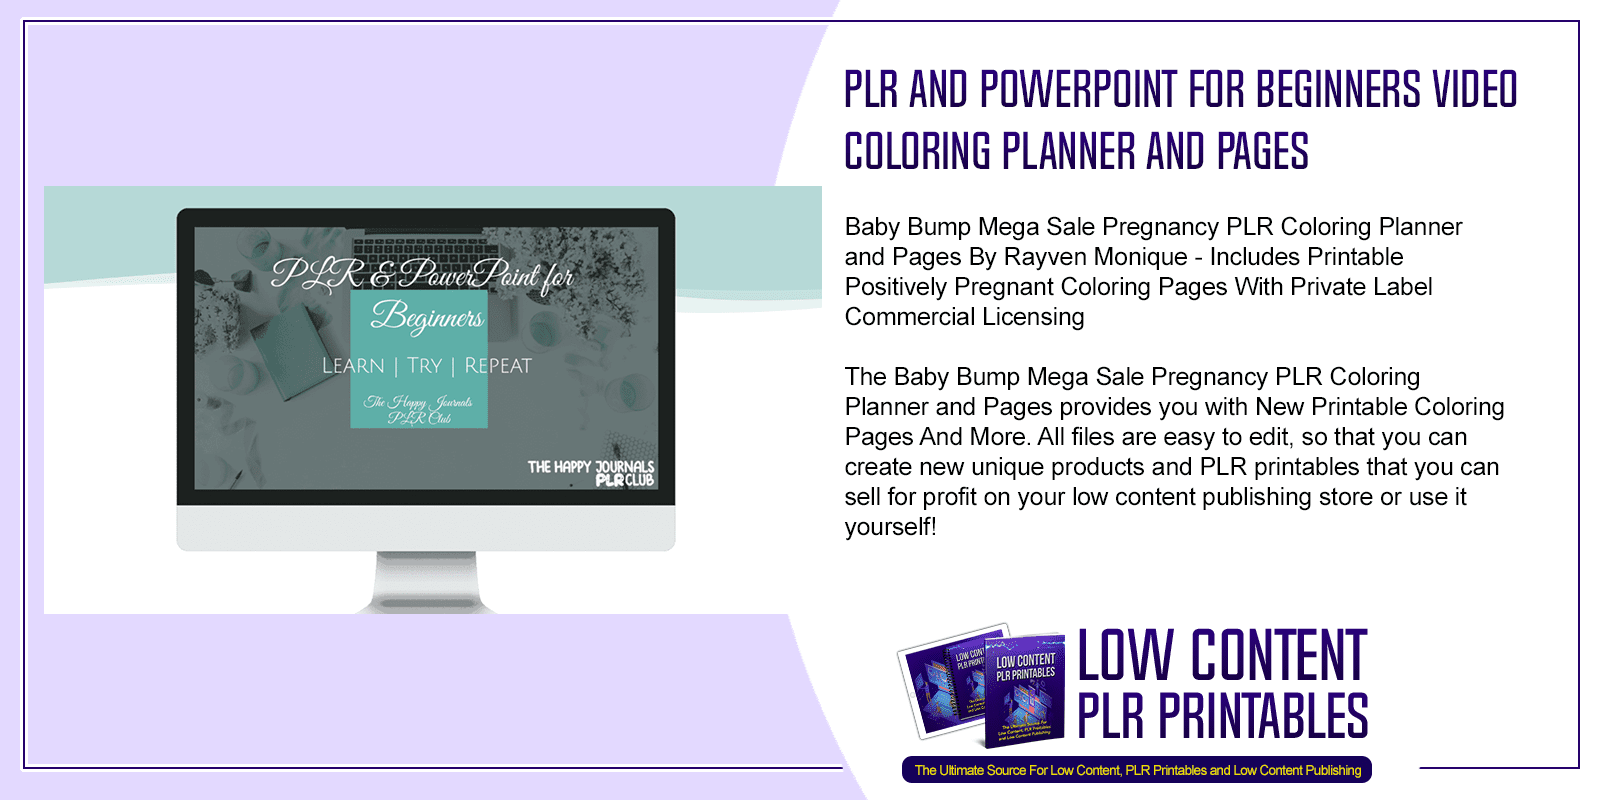 PLR and PowerPoint for Beginners Video Training Course